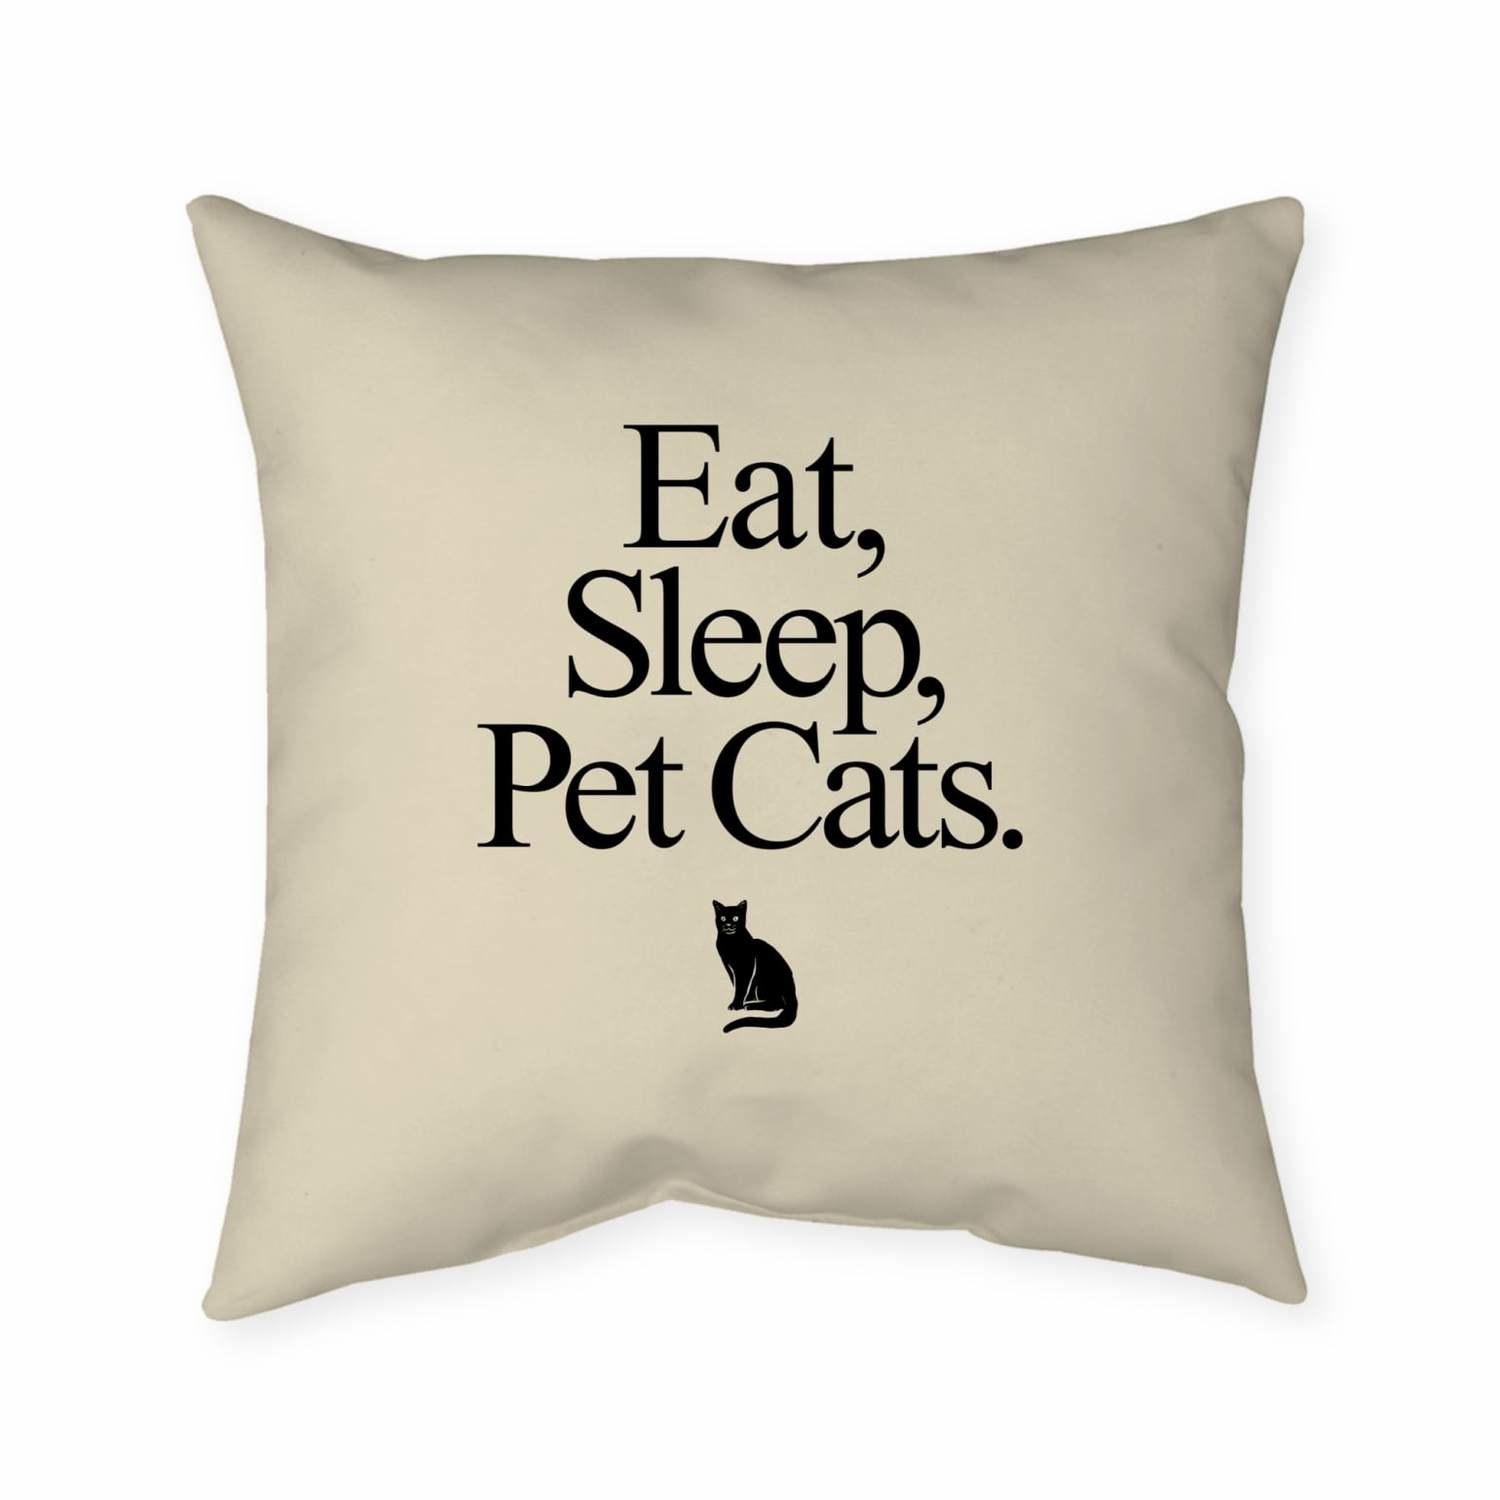 &quot;Eat, Sleep Pet Cats&quot; square pillow with a graphic black cat in the center